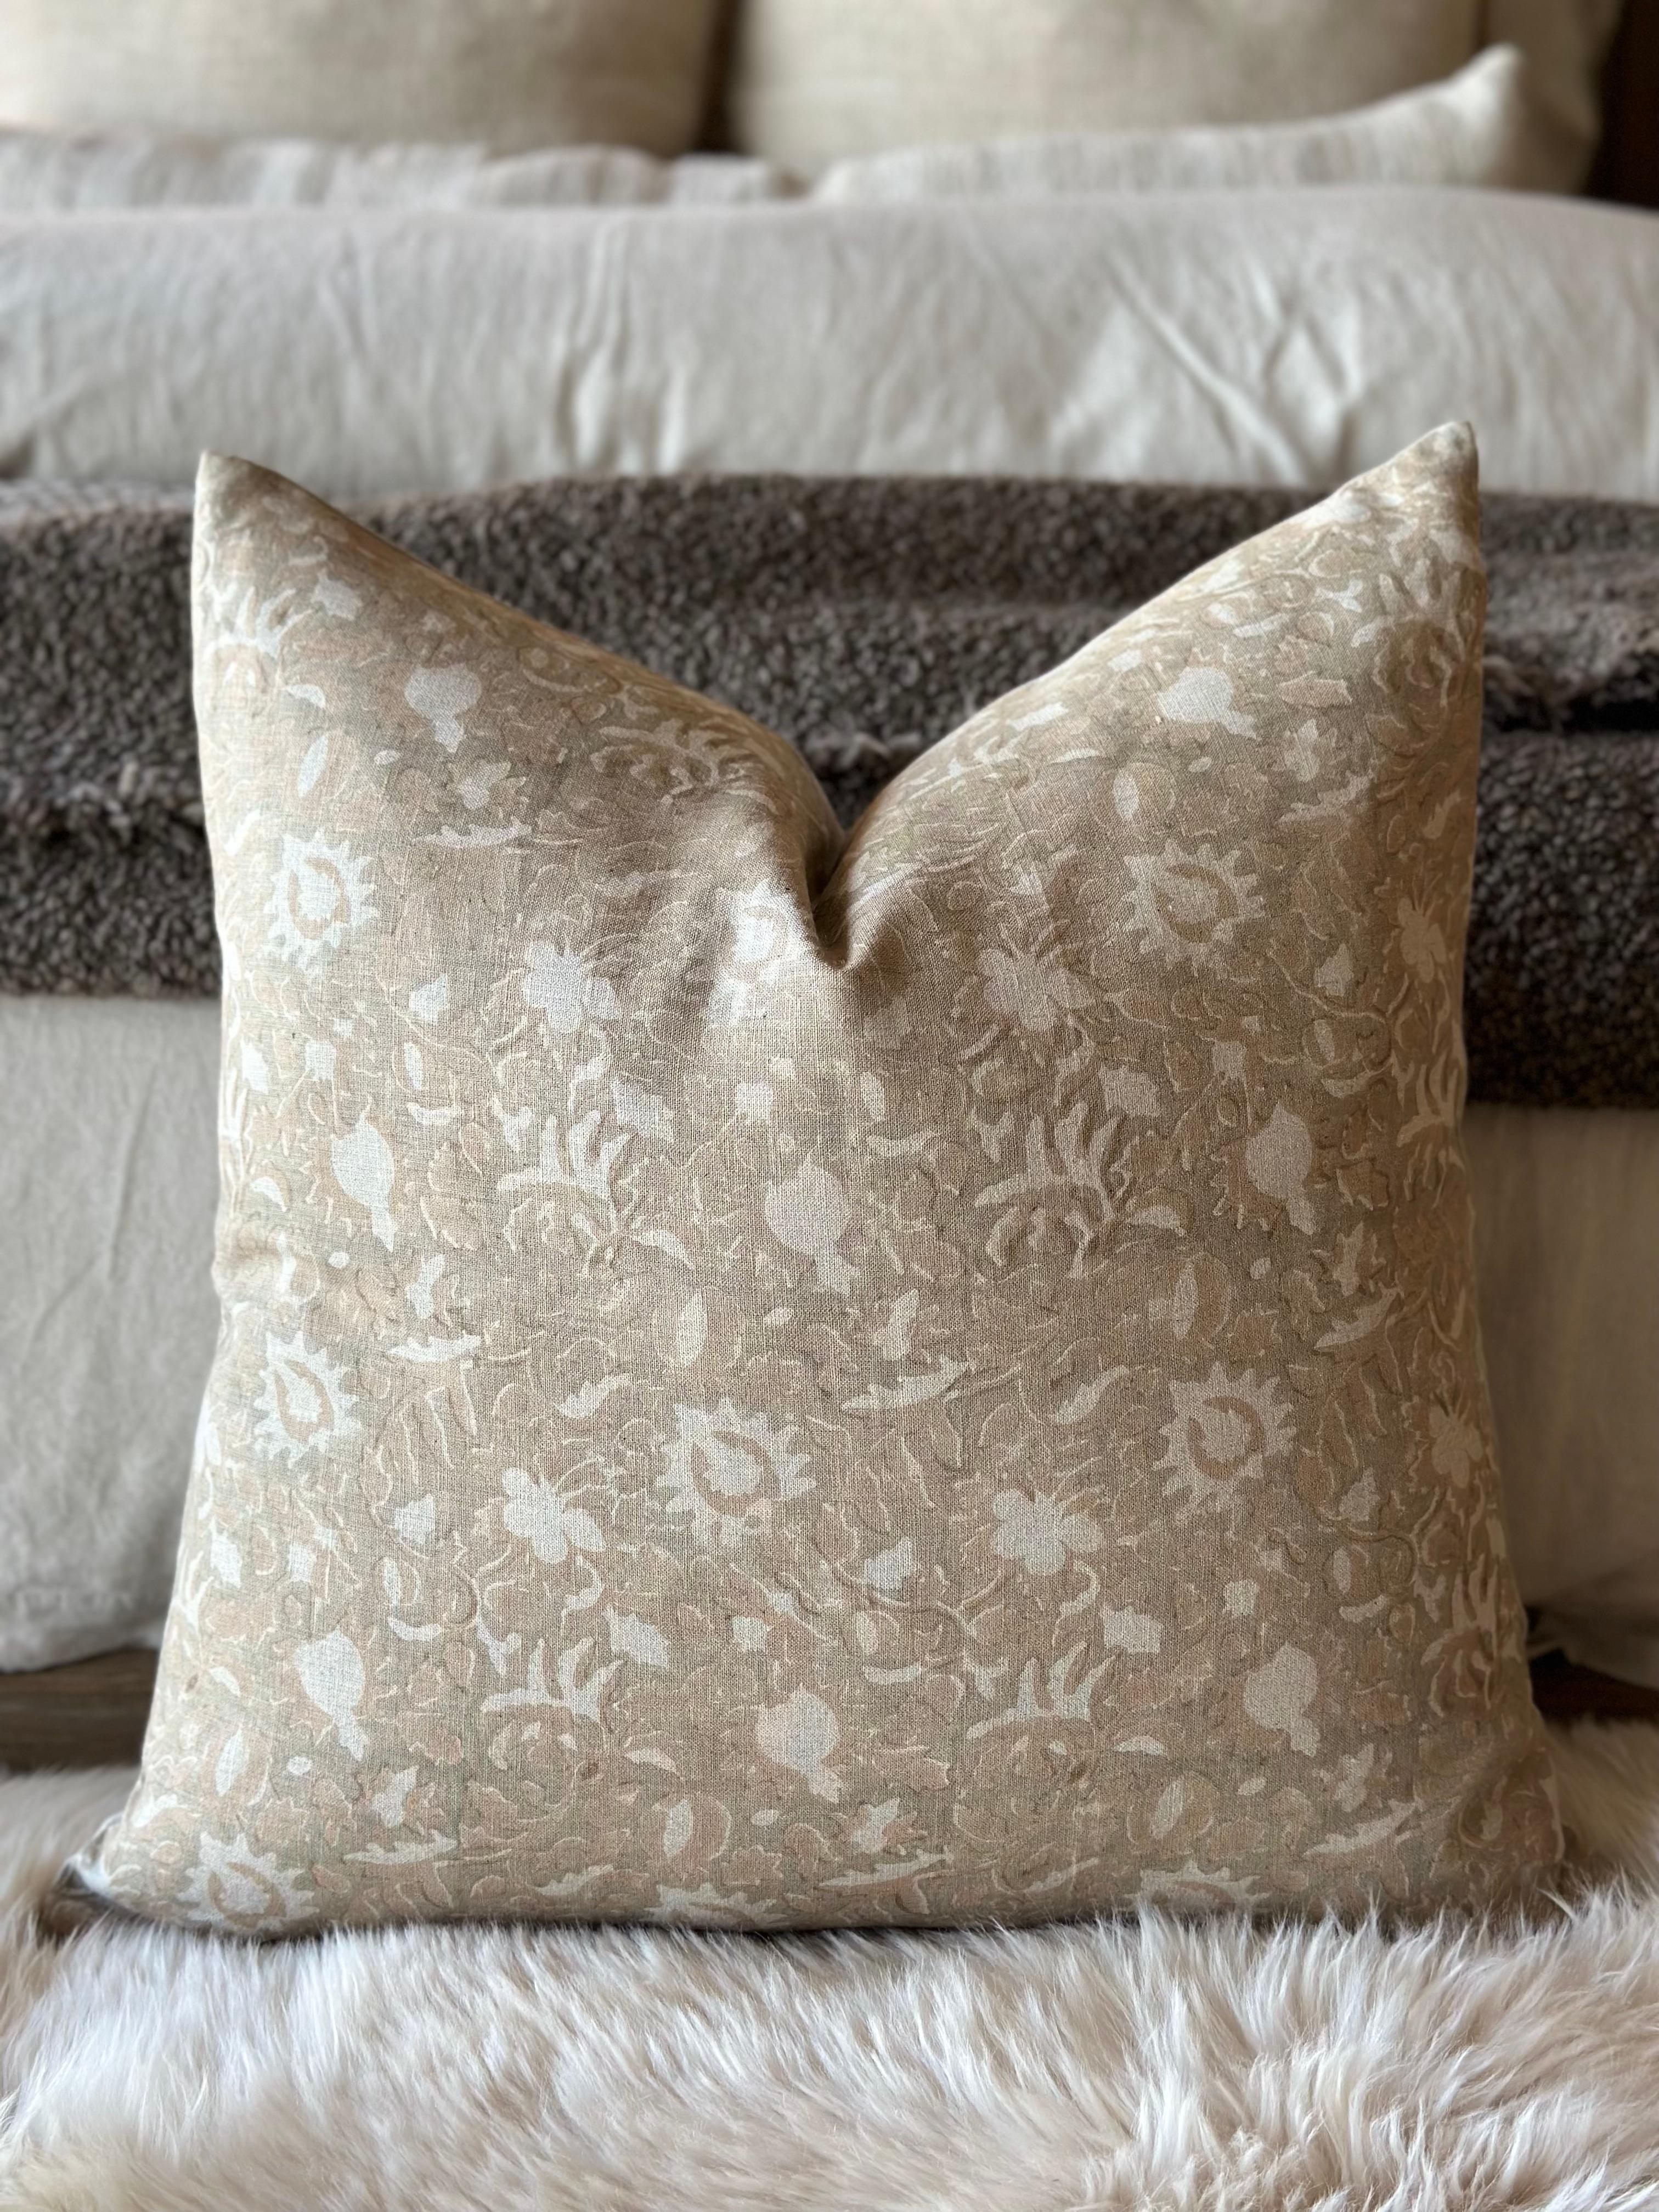 Sausalito Floral Block Printed Linen Pillow with Down Feather Insert In New Condition For Sale In Brea, CA